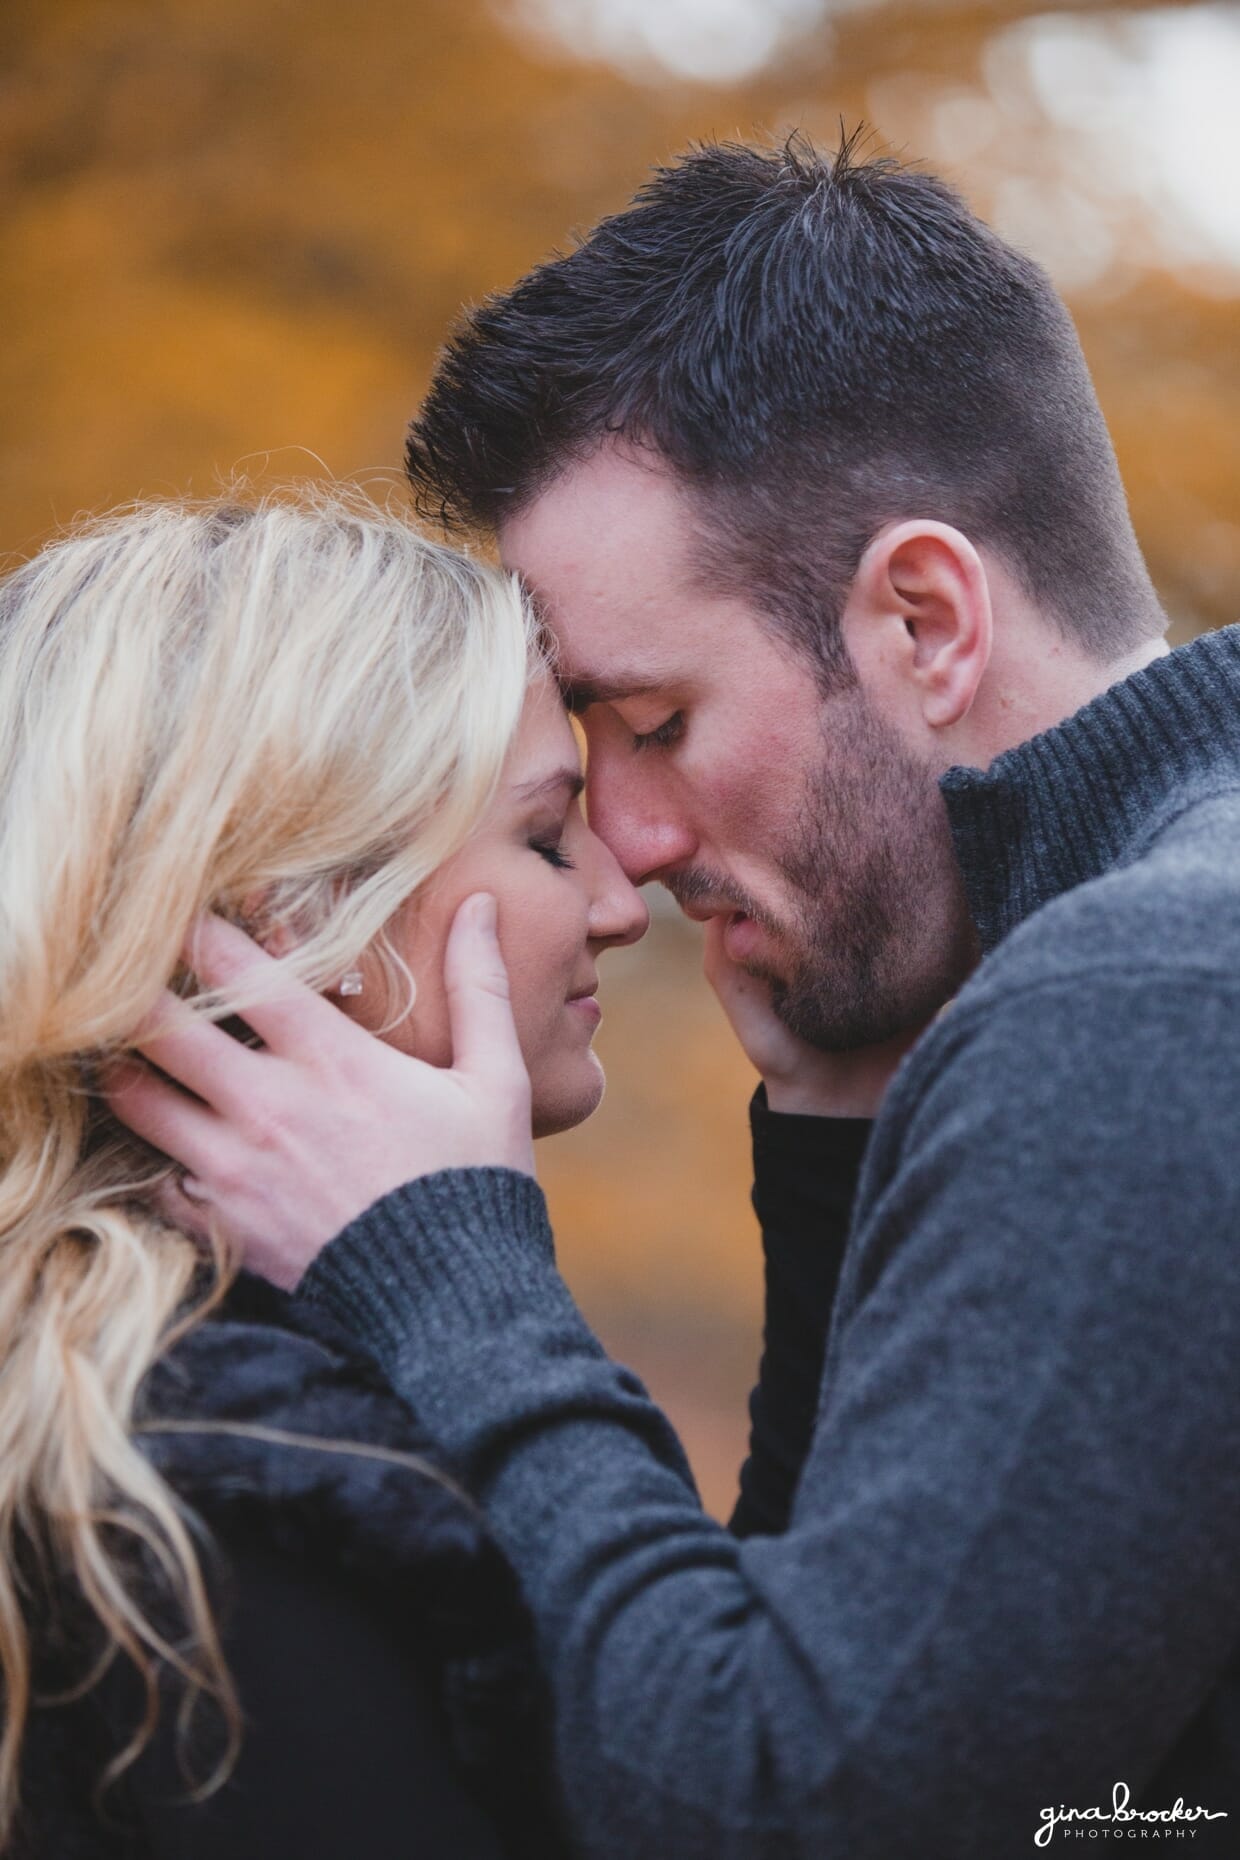 A sweet portrait of a couple just before they kiss during their engagement session in Boston's Arnold Arboretum